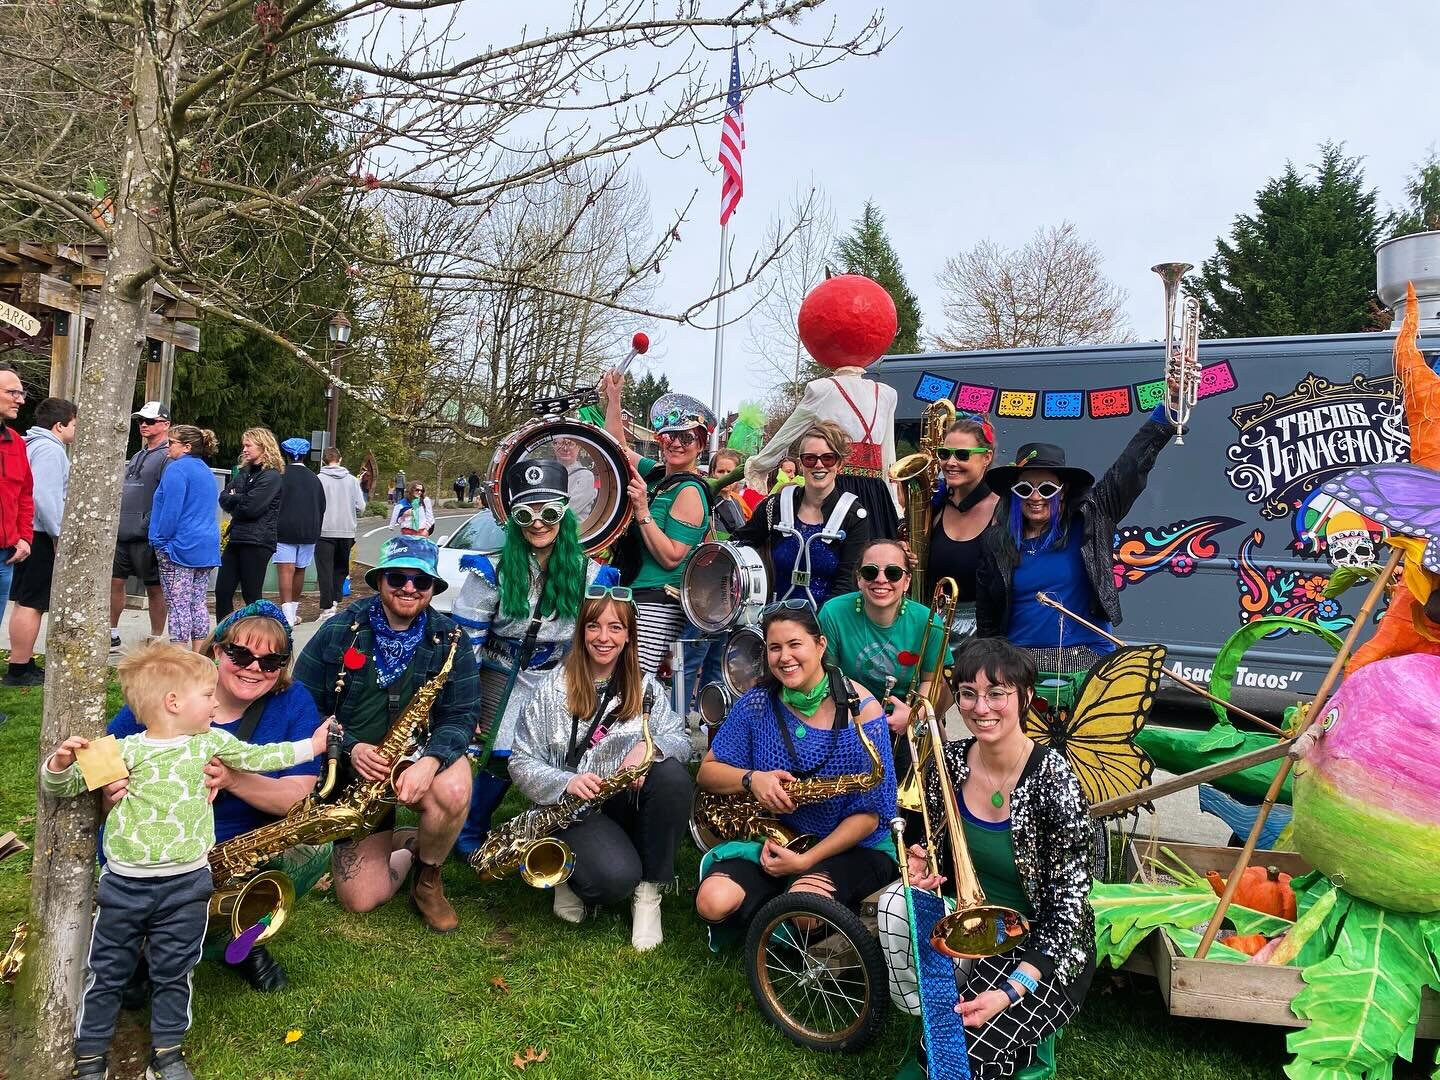 March of the Vegetables parade in Duvall, WA! Nothing beets this gig 🫛🥦🥕😍🎺🎷🥁